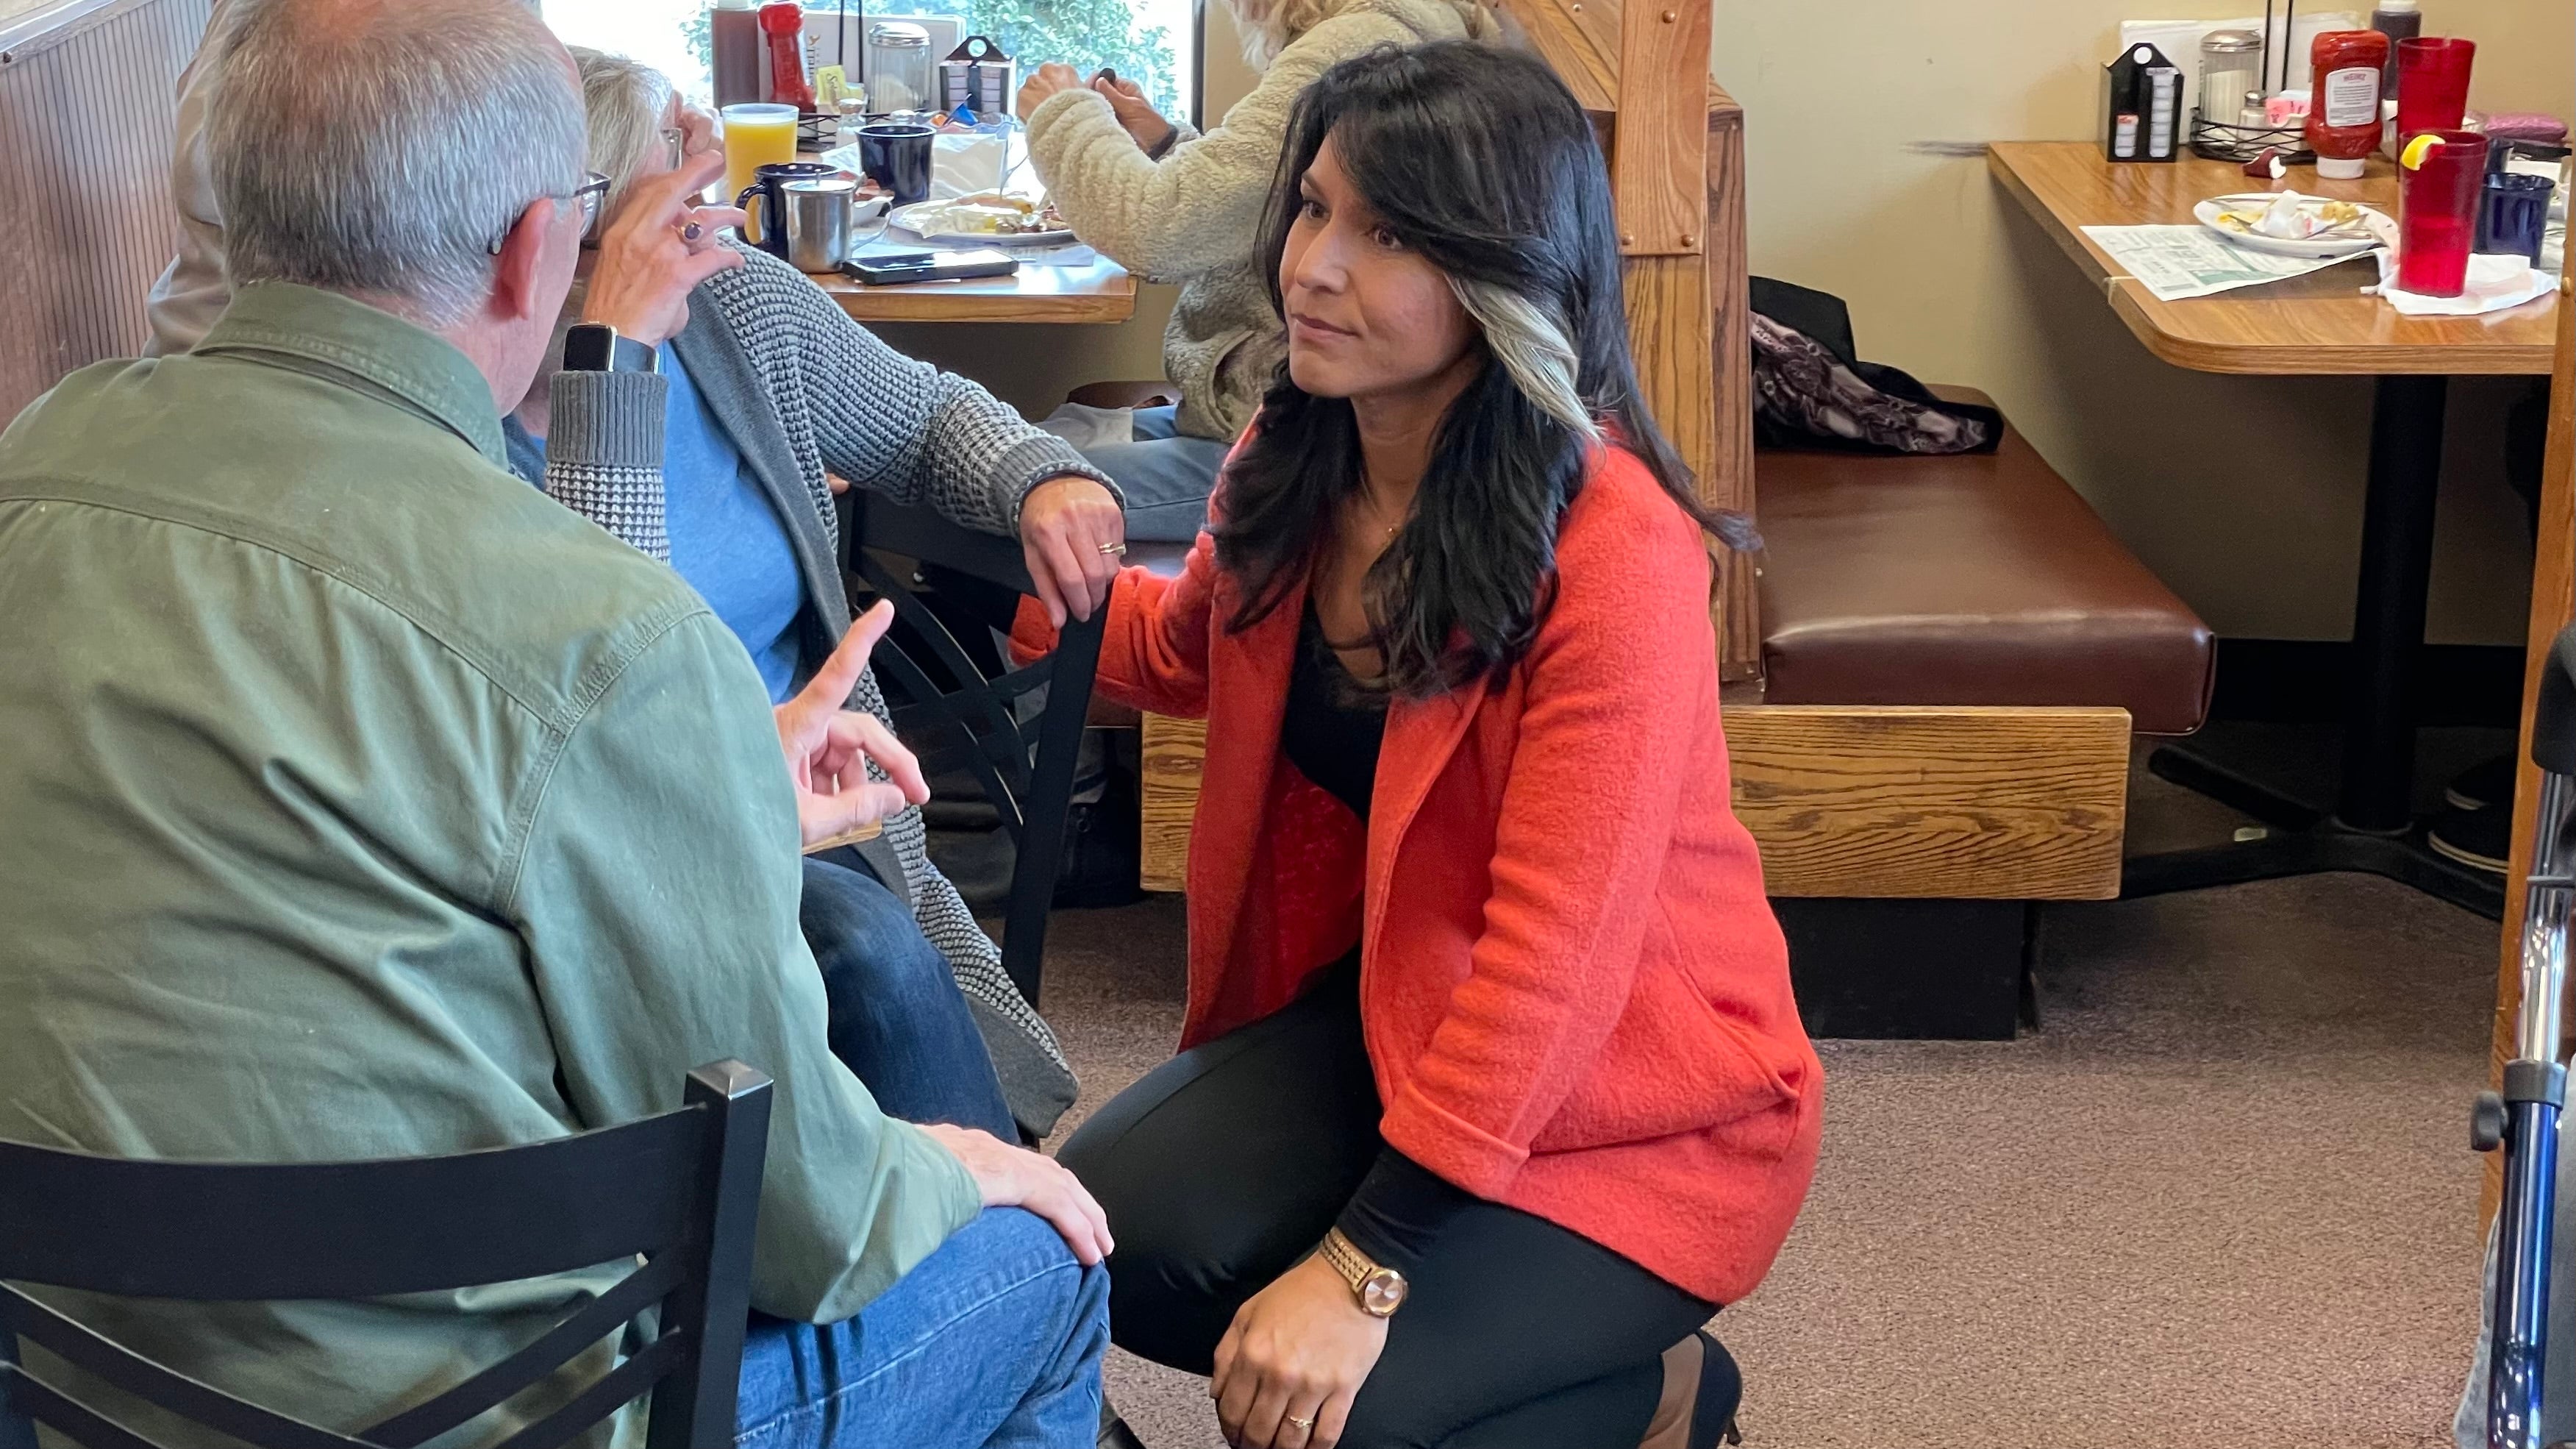 Tulsi Gabbard: Campaigning with Republican not a move towards joining GOP, says 'I'm an independent'